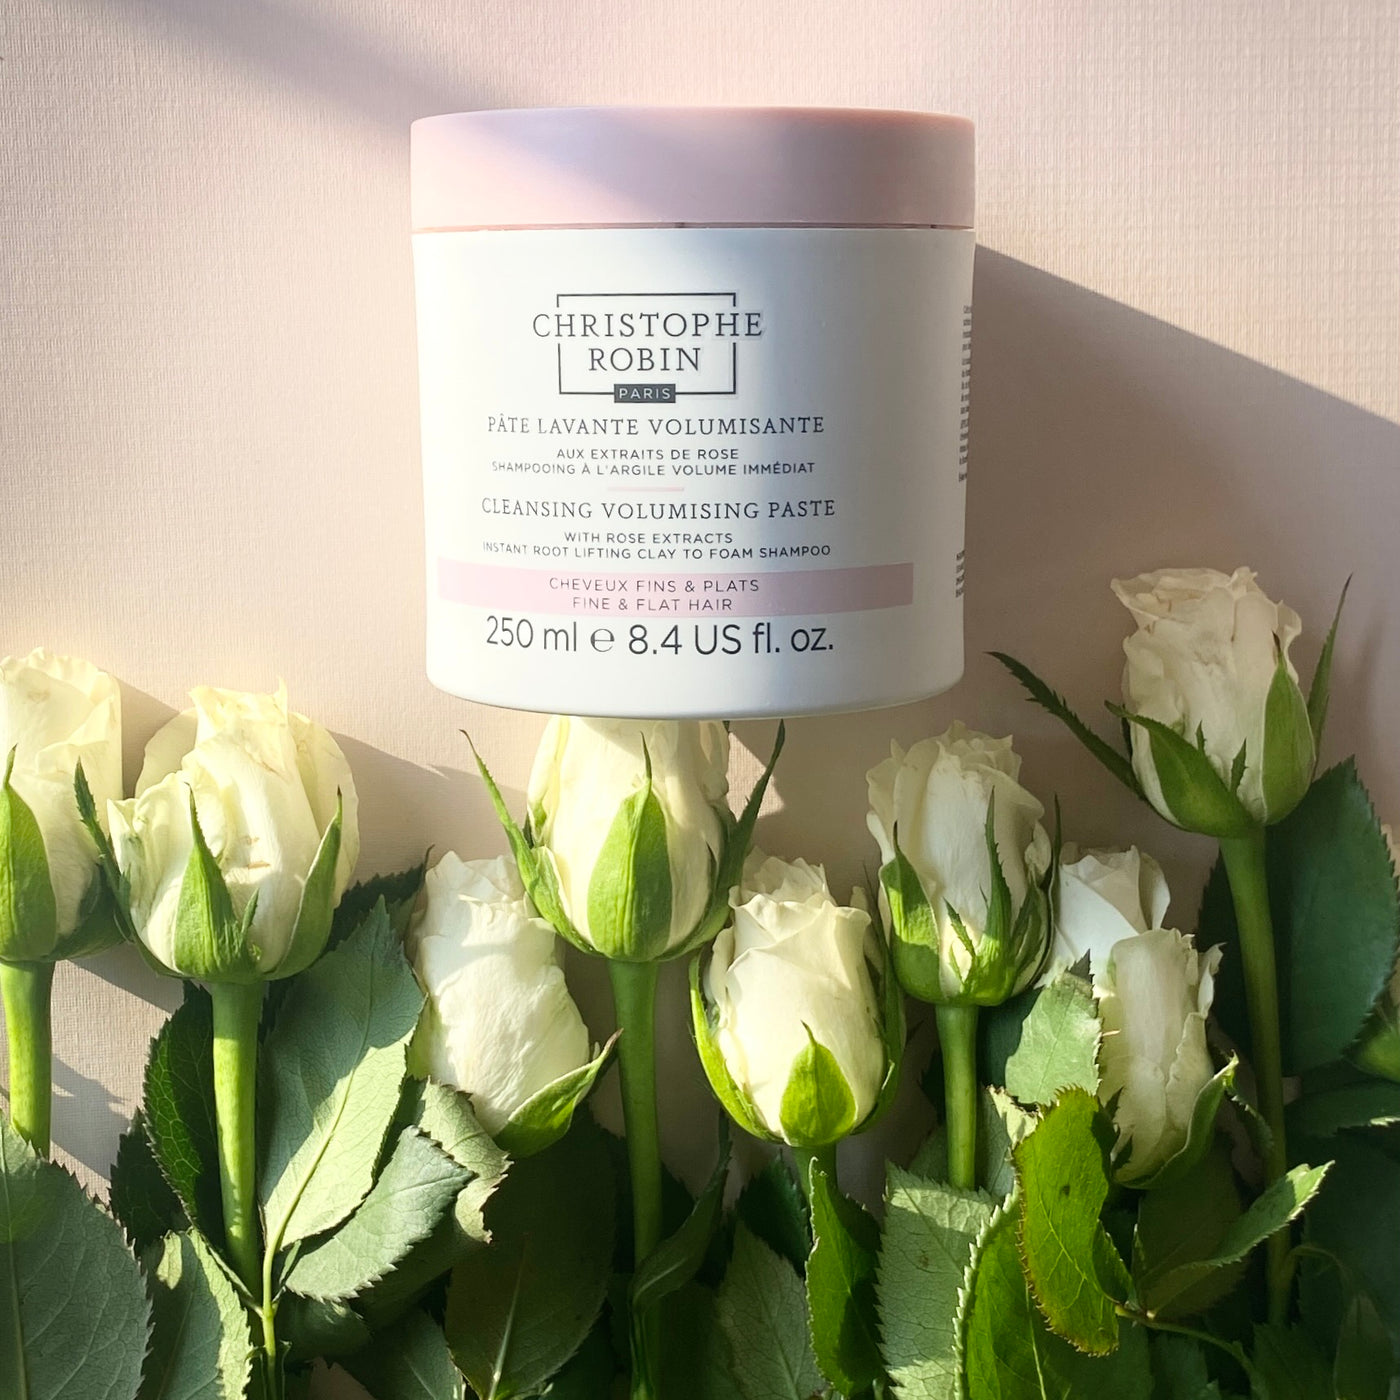 Cleansing Volumizing Paste with Rose Extracts